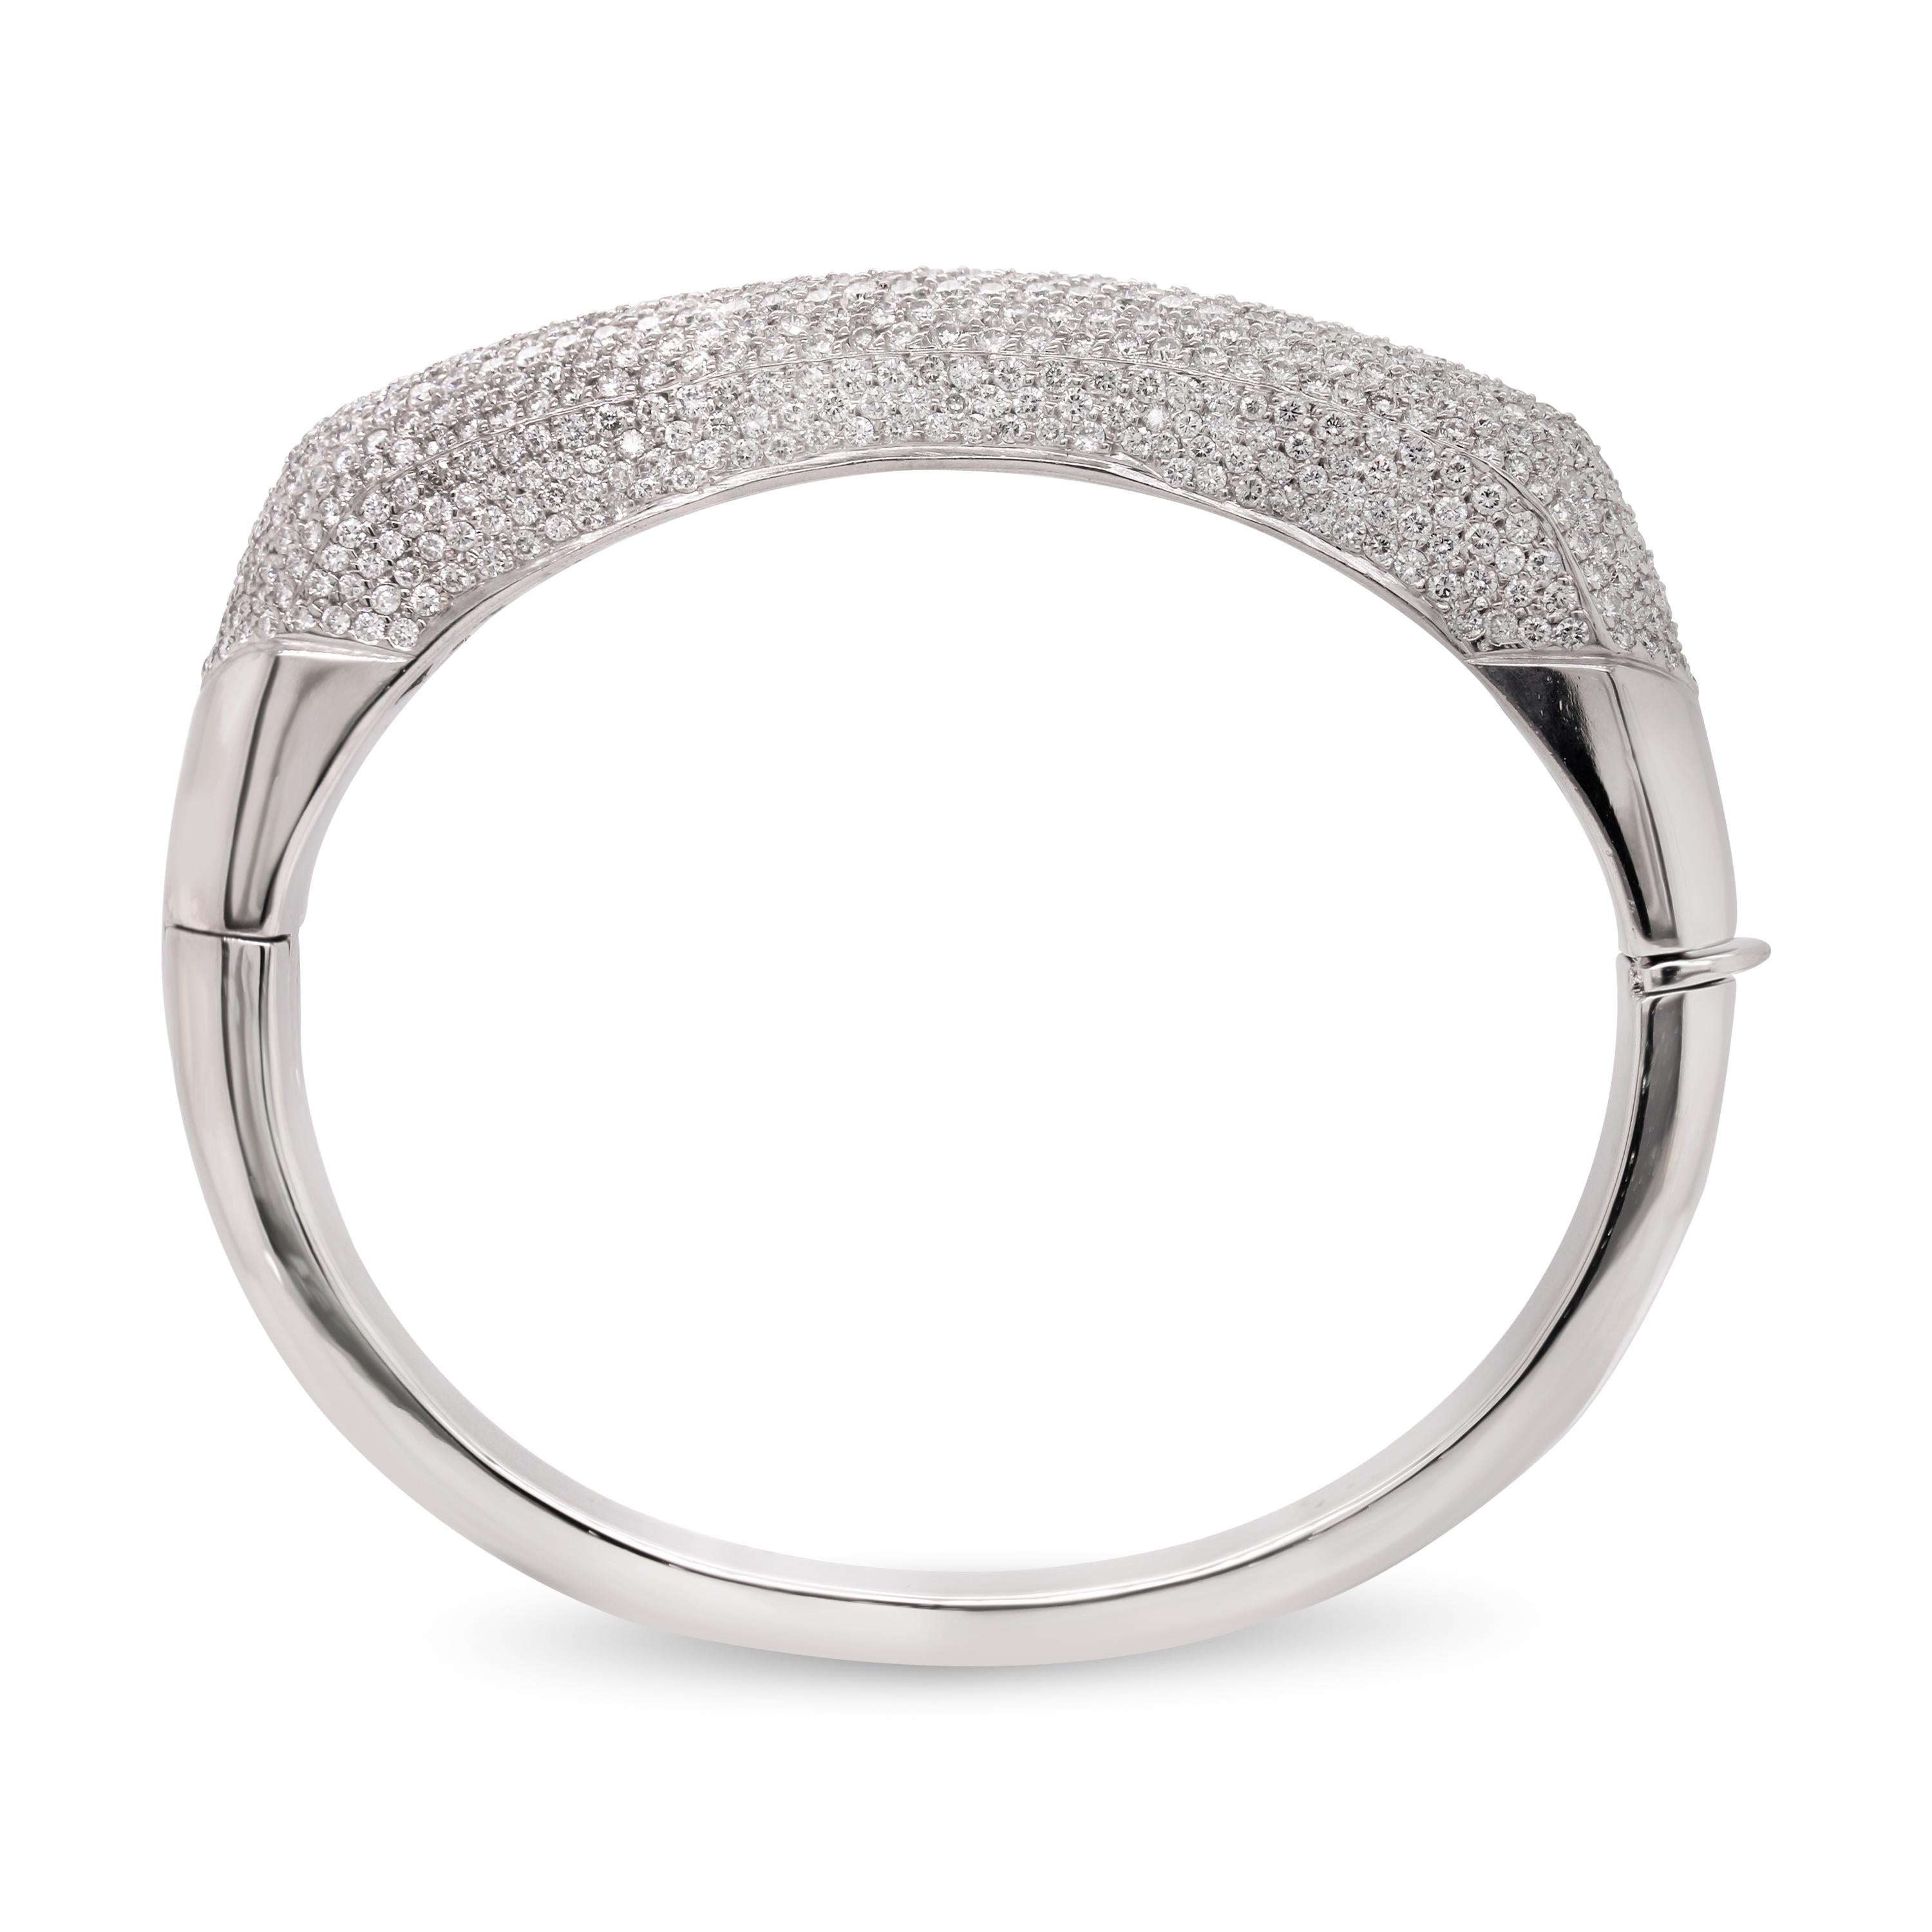 18 Karat White Gold Pavé Set Diamonds Square Top Wide Bangle Bracelet

Bangle has a straight, square top in which the diamonds are set with the rest of the bangle being a high-polished, shiny finishing. 

Apprx. 6 carat, G color,  VS-SI clarity